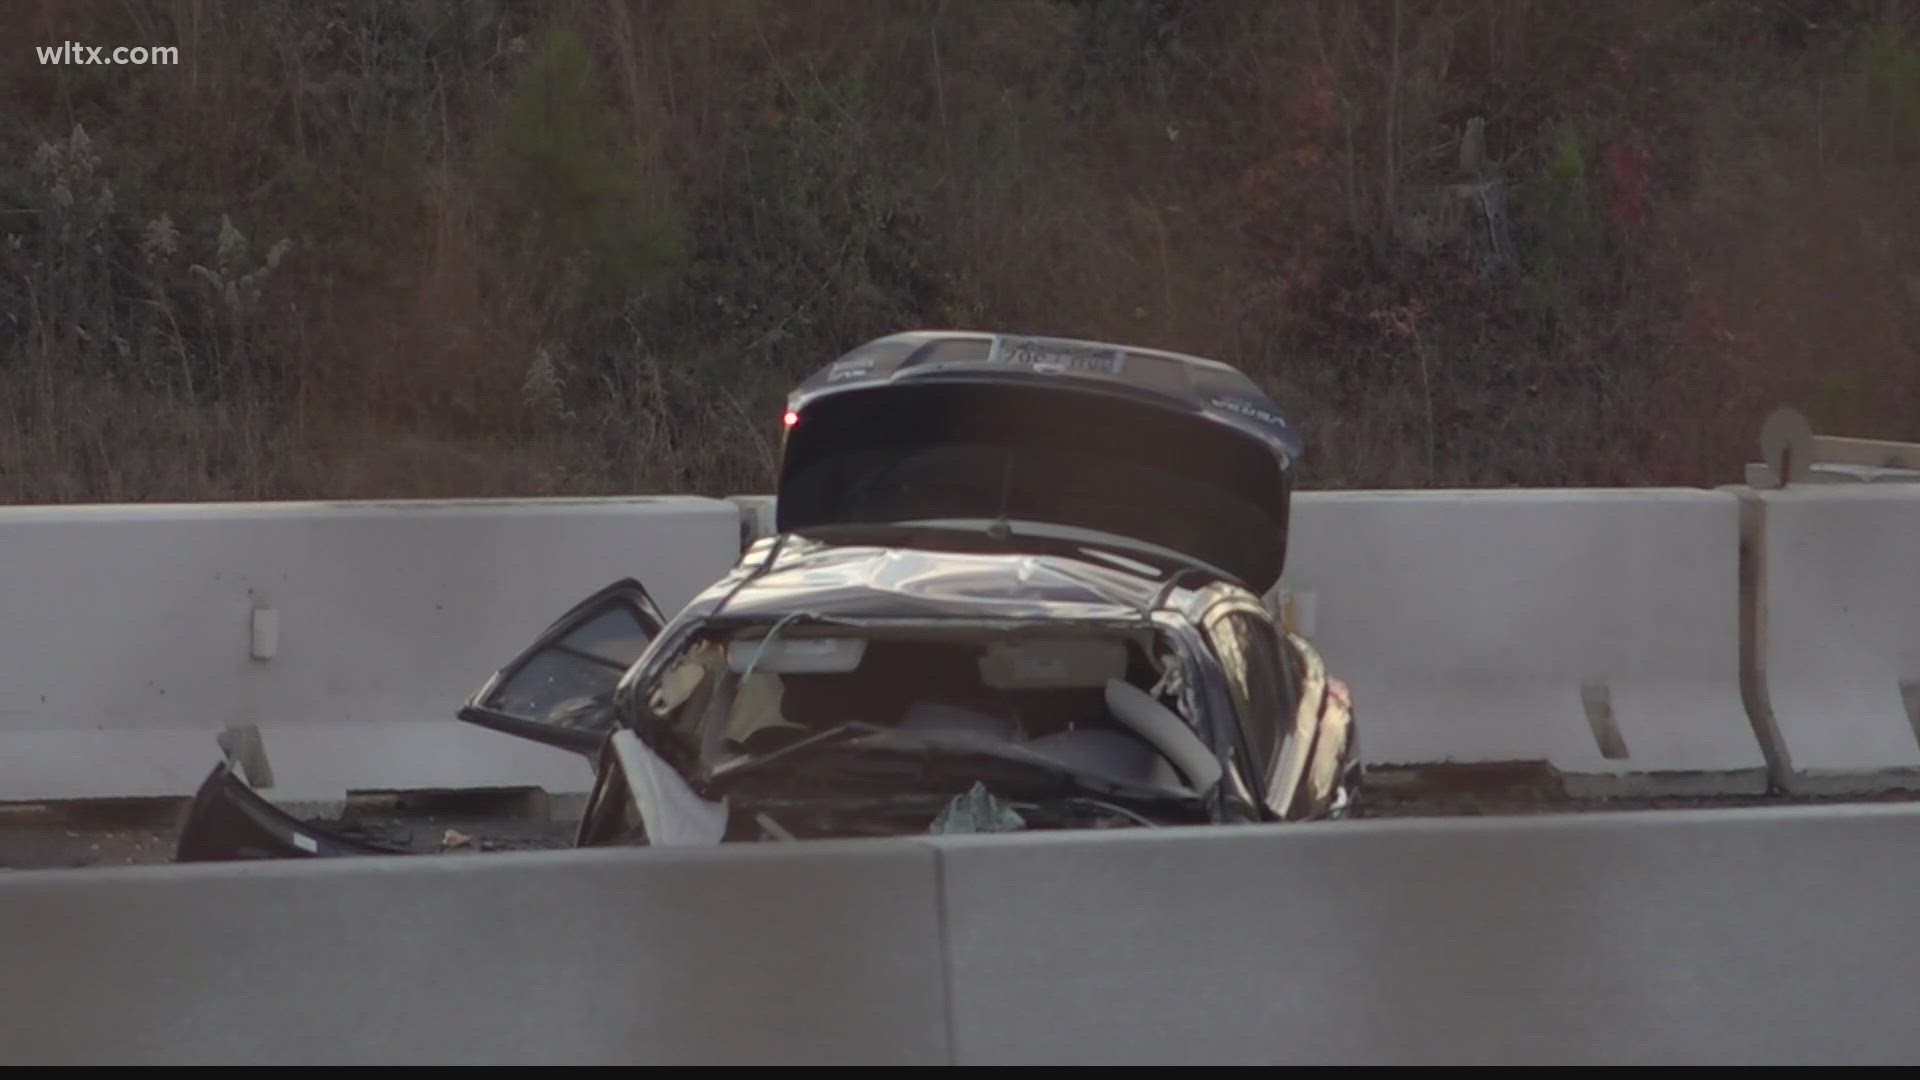 Investigators say the driver was running from police when he crashed head-on into another driver on I-126.